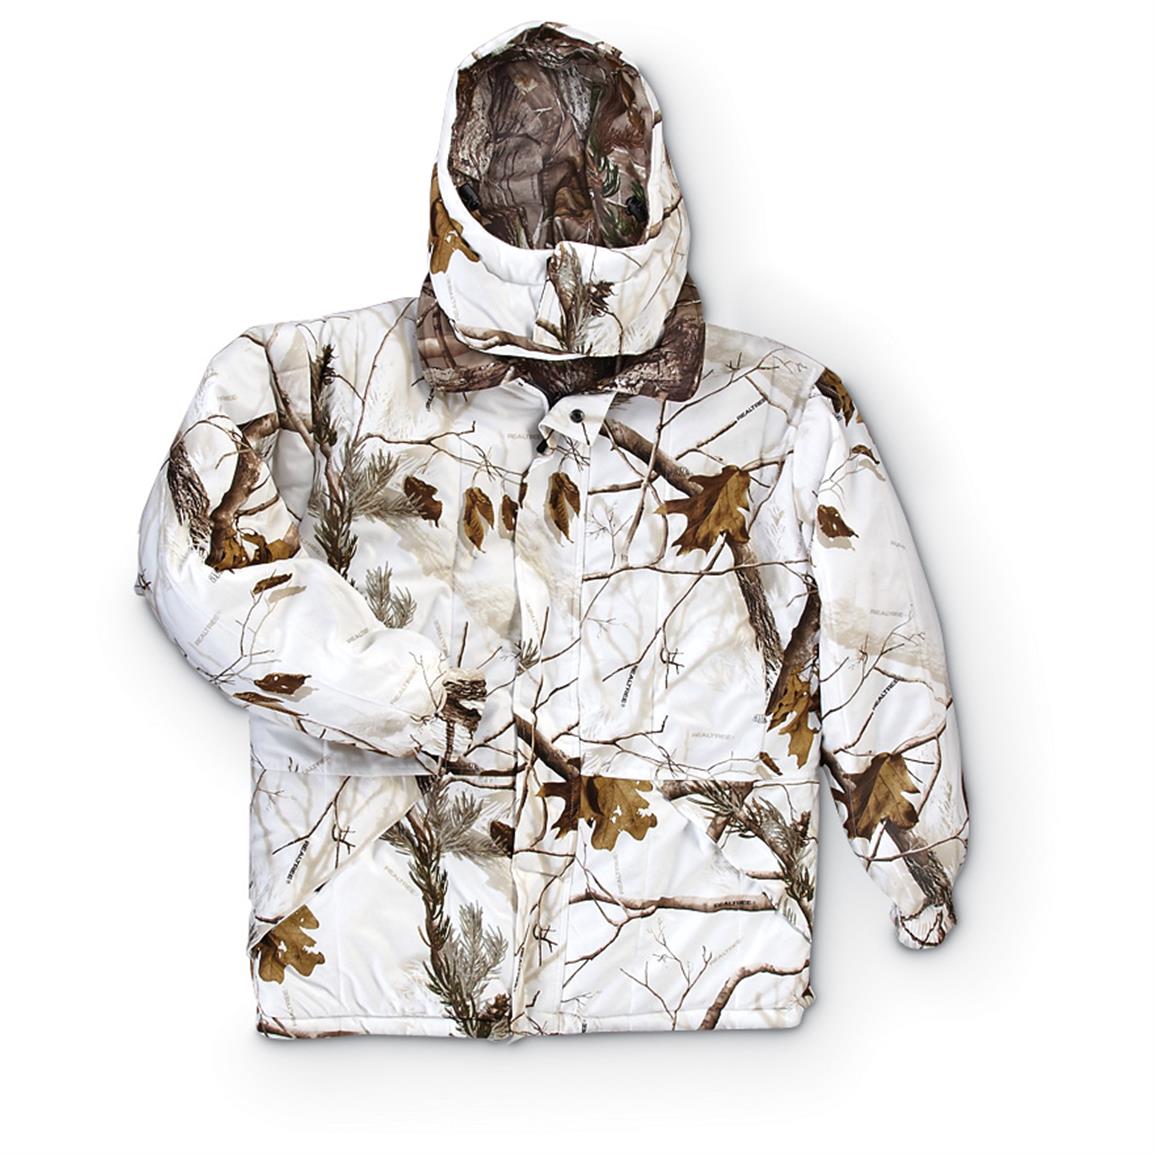 Guide Gear Reversible Hunting Jacket 593727, Camo Jackets at Sportsman's Guide